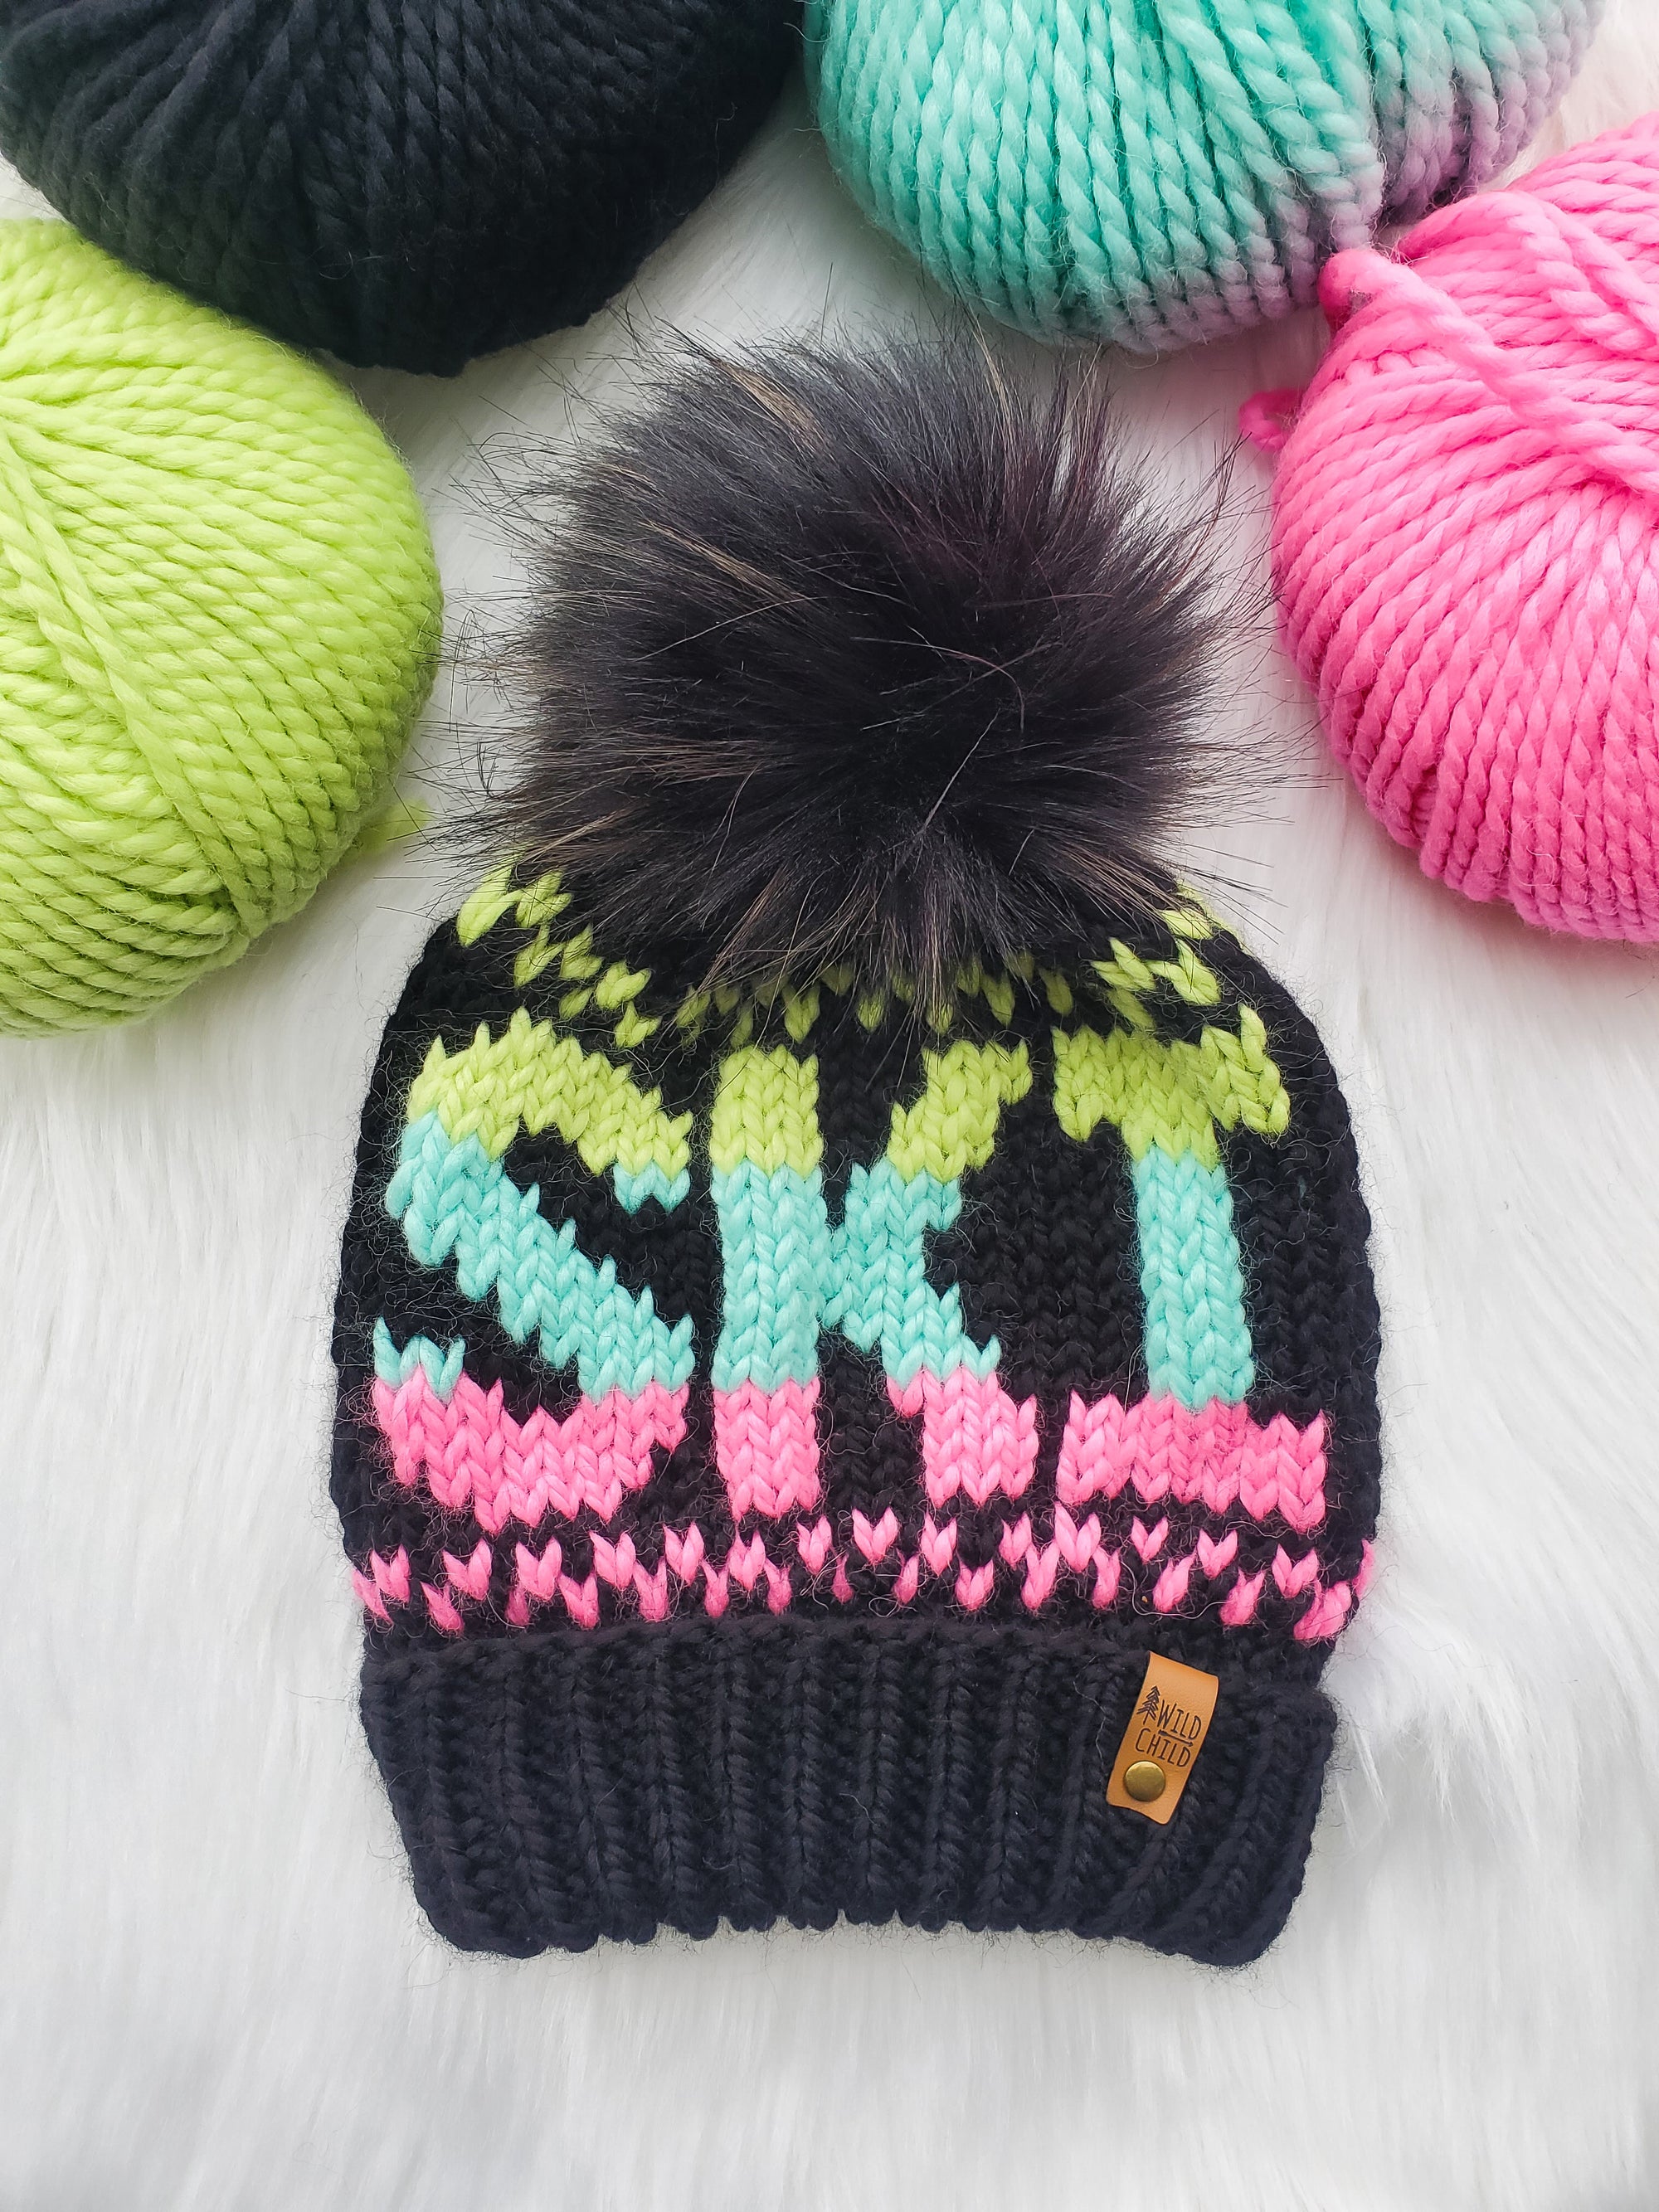 SKI Hat - Made To Order - Adult Size